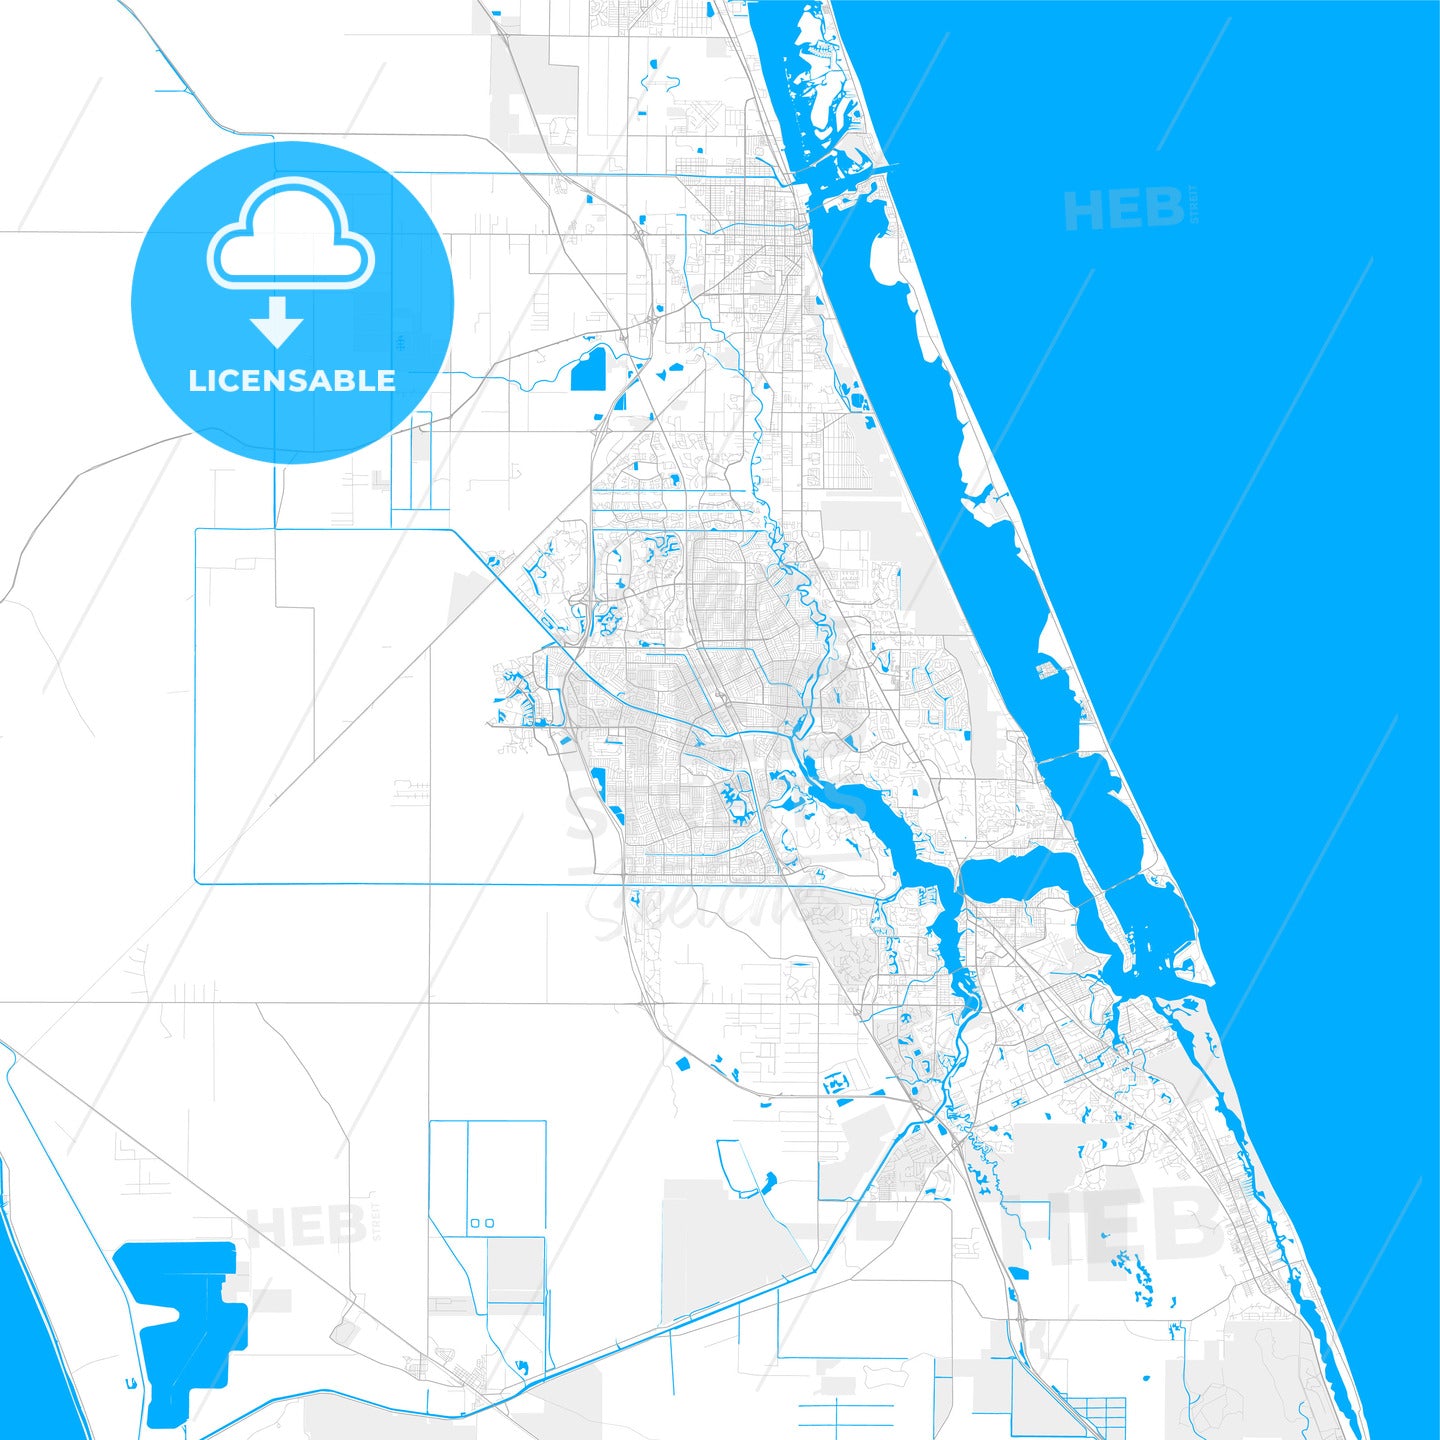 Rich detailed vector map of Port St. Lucie, Florida, USA